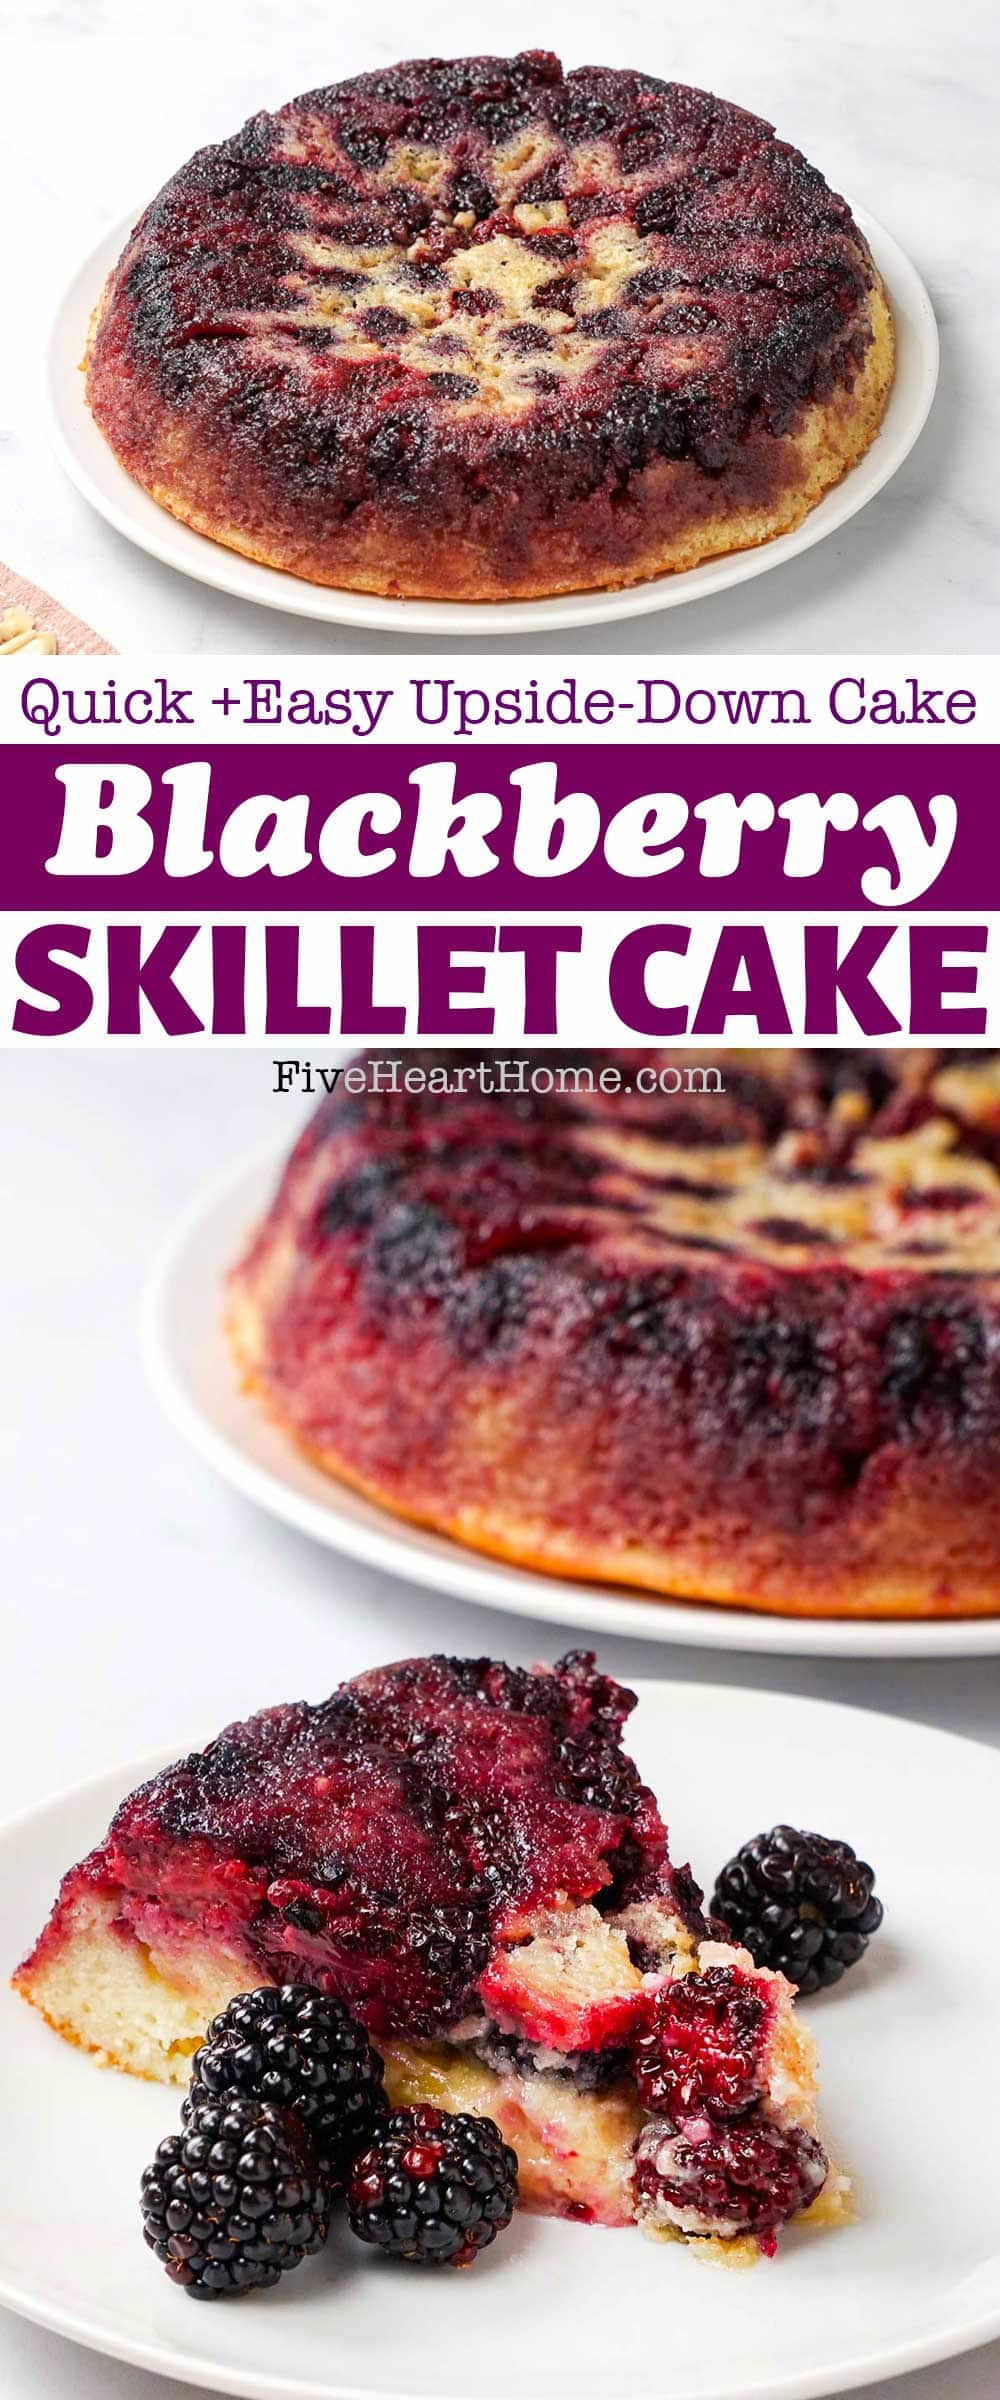 Blackberry Cake ~ a delicious, upside-down skillet cake featuring plump, fresh blackberries and a simple, homemade batter. This blackberry cake recipe is easy to make, impressive to serve, and tastes like summer! | FiveHeartHome.com via @fivehearthome